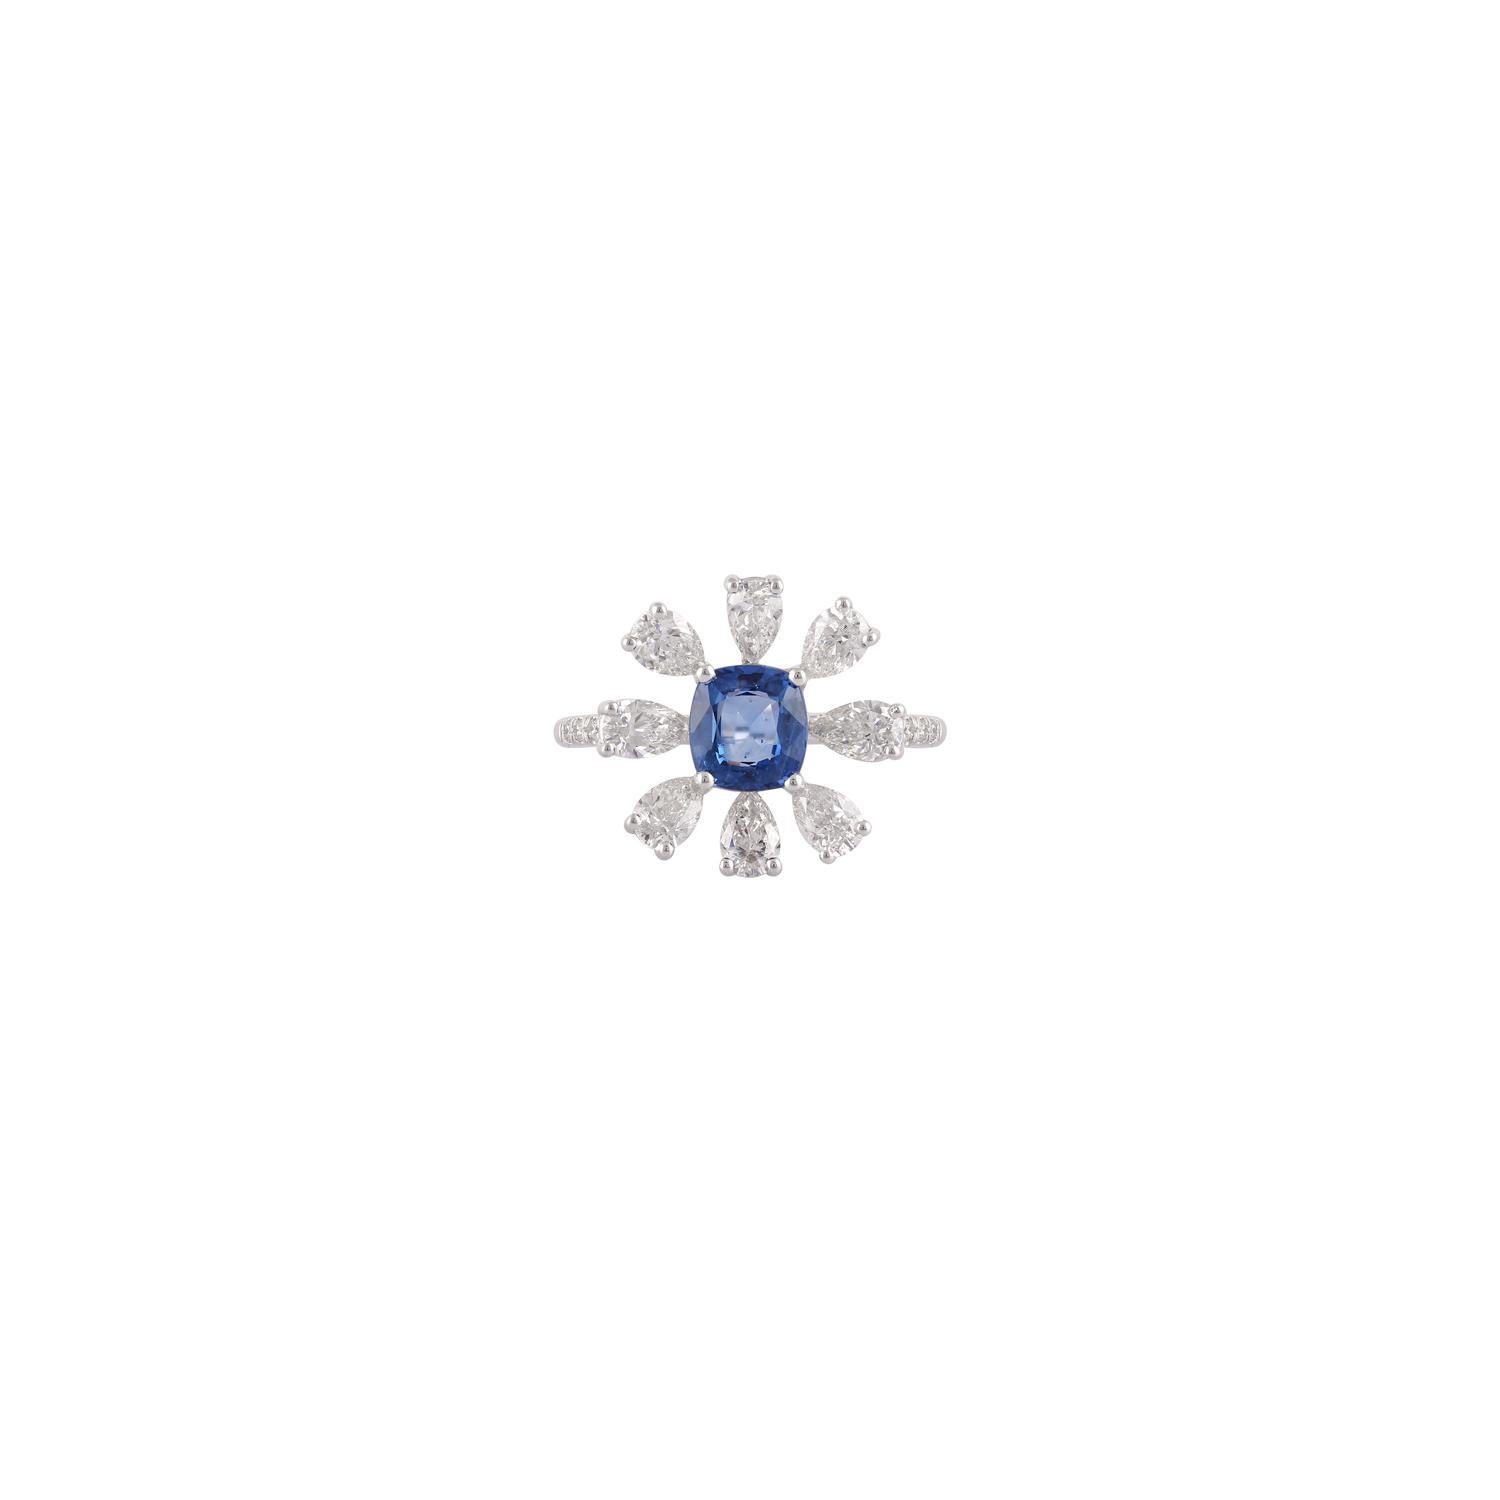 Sapphire = 1.36 Carat
Diamonds = 1.59 Carats
Metal: 18K White Gold
Ring Size: 7.5* US
*It can be resized complimentary
